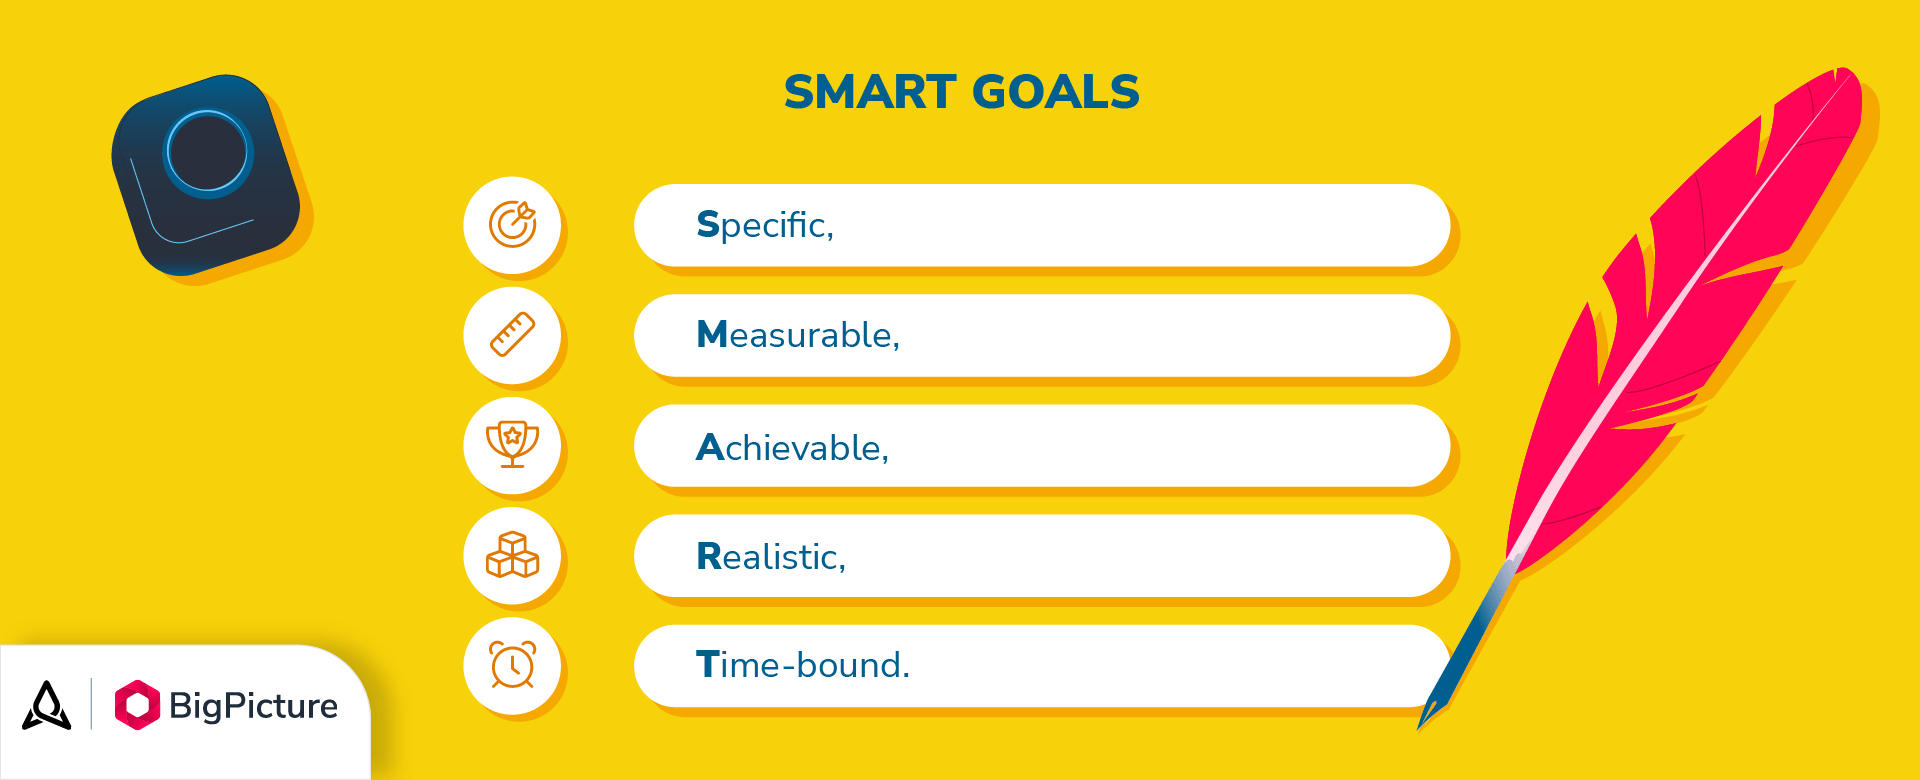 A list of characteristics of smart goals: Specific, Measurable, Achievable, Realistic, Time-bound